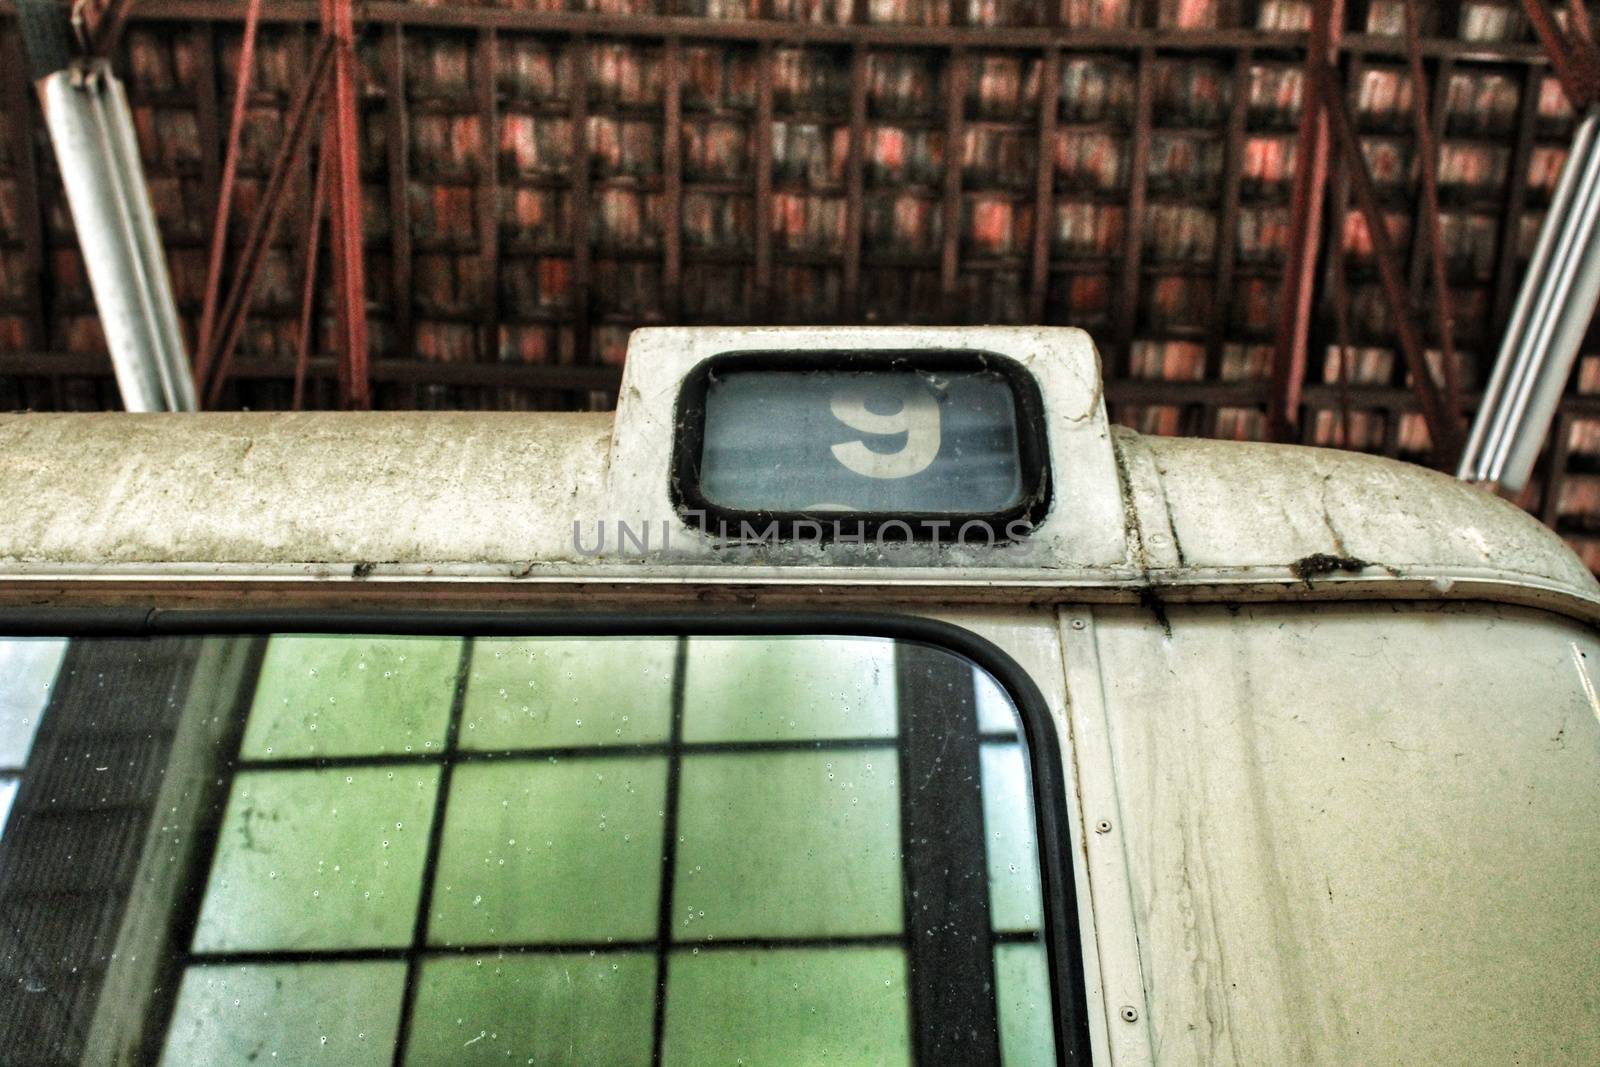 Texture and background of old school bus with number nine and tile background